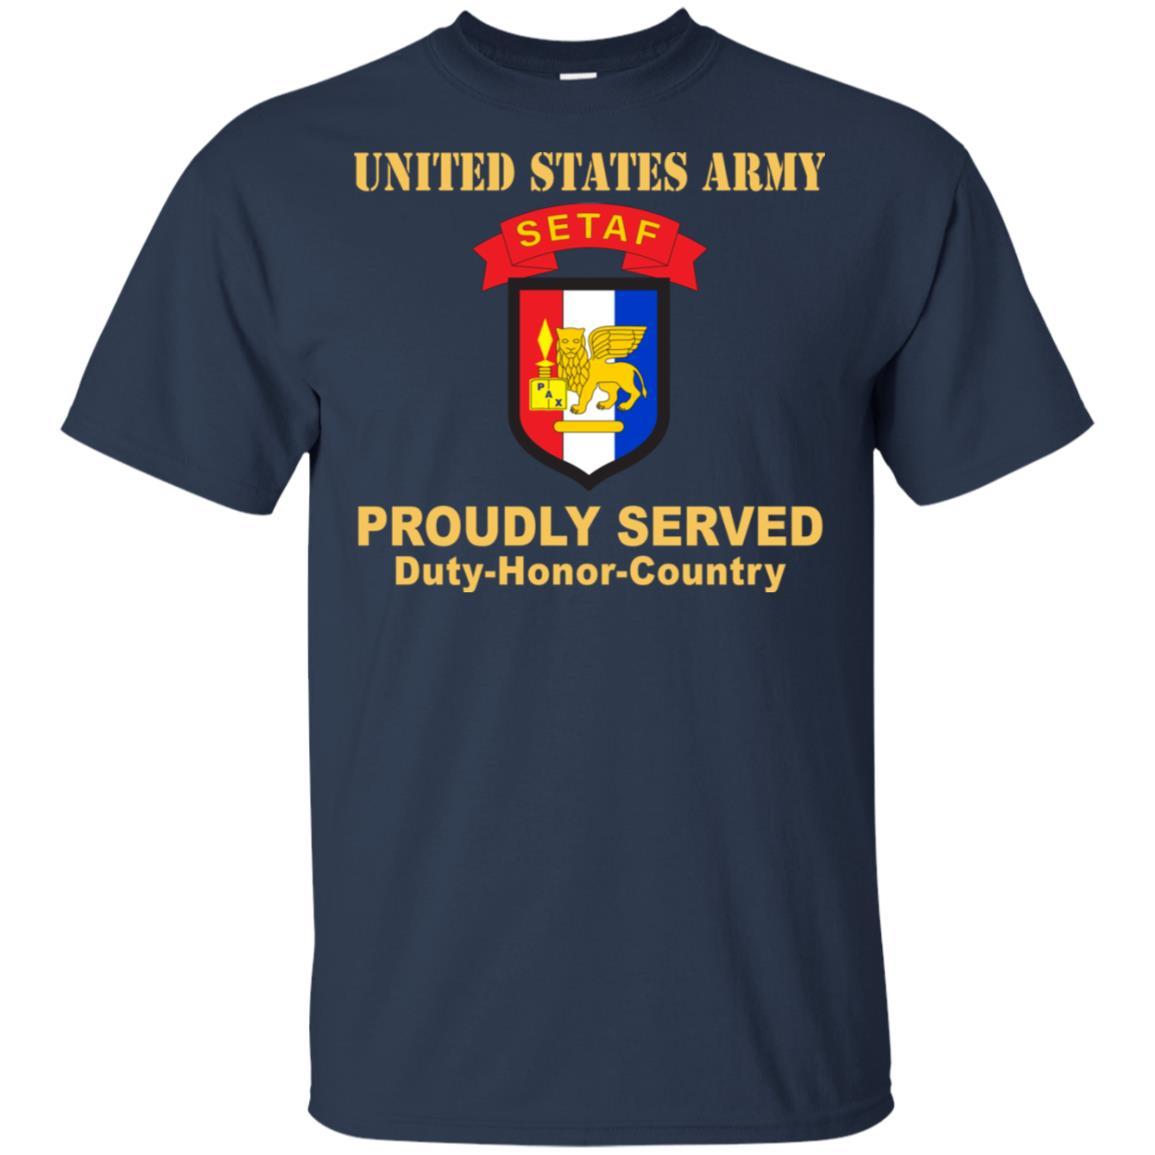 US ARMY USARAF-SETAF COMBAT SERVICE ID BADGE- Proudly Served T-Shirt On Front For Men-TShirt-Army-Veterans Nation